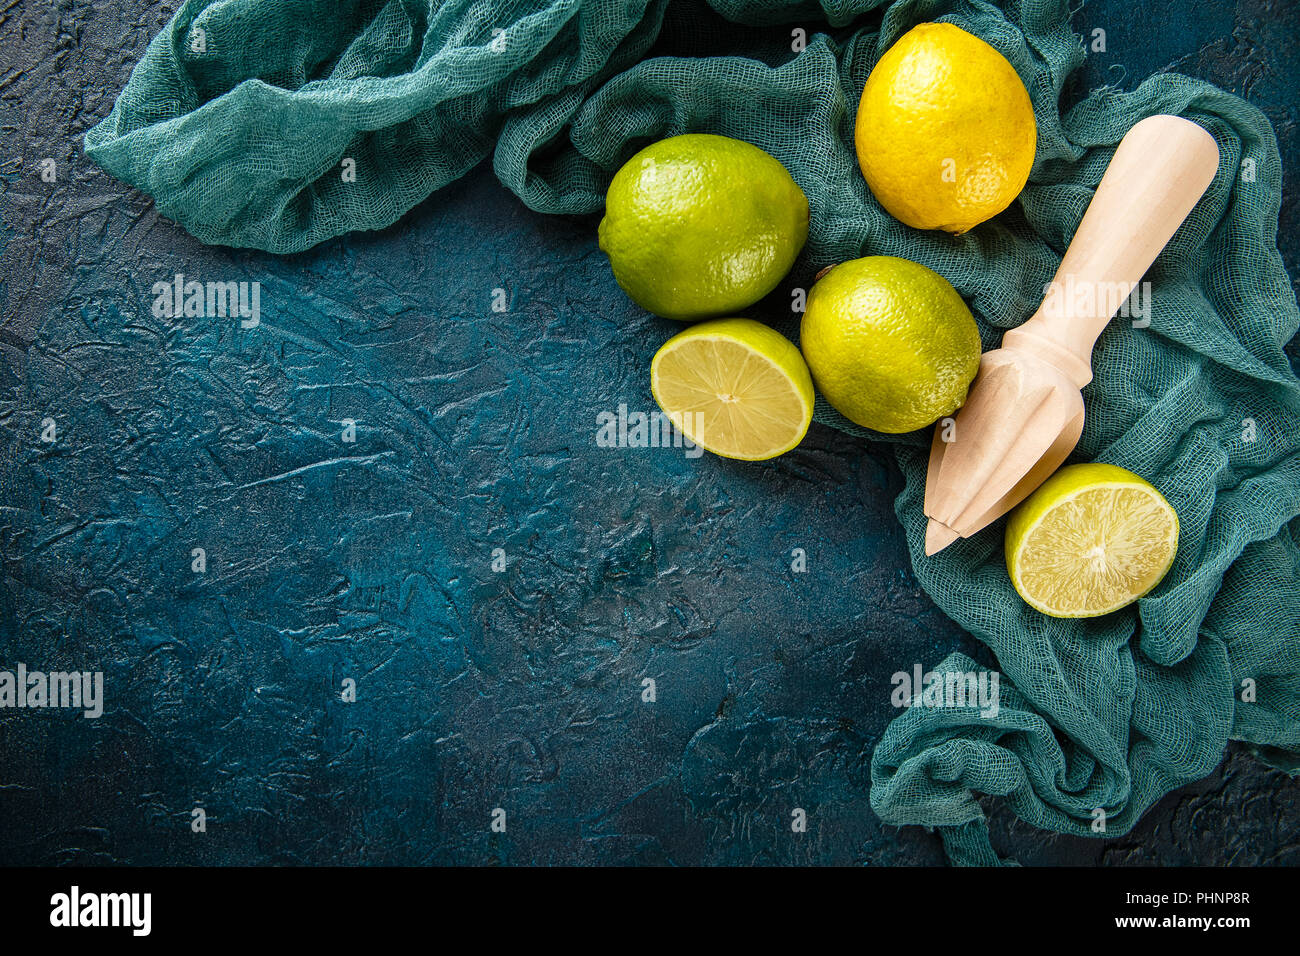 Fresh limes with citrus juicer stick Stock Photo: 217452055 - Alamy